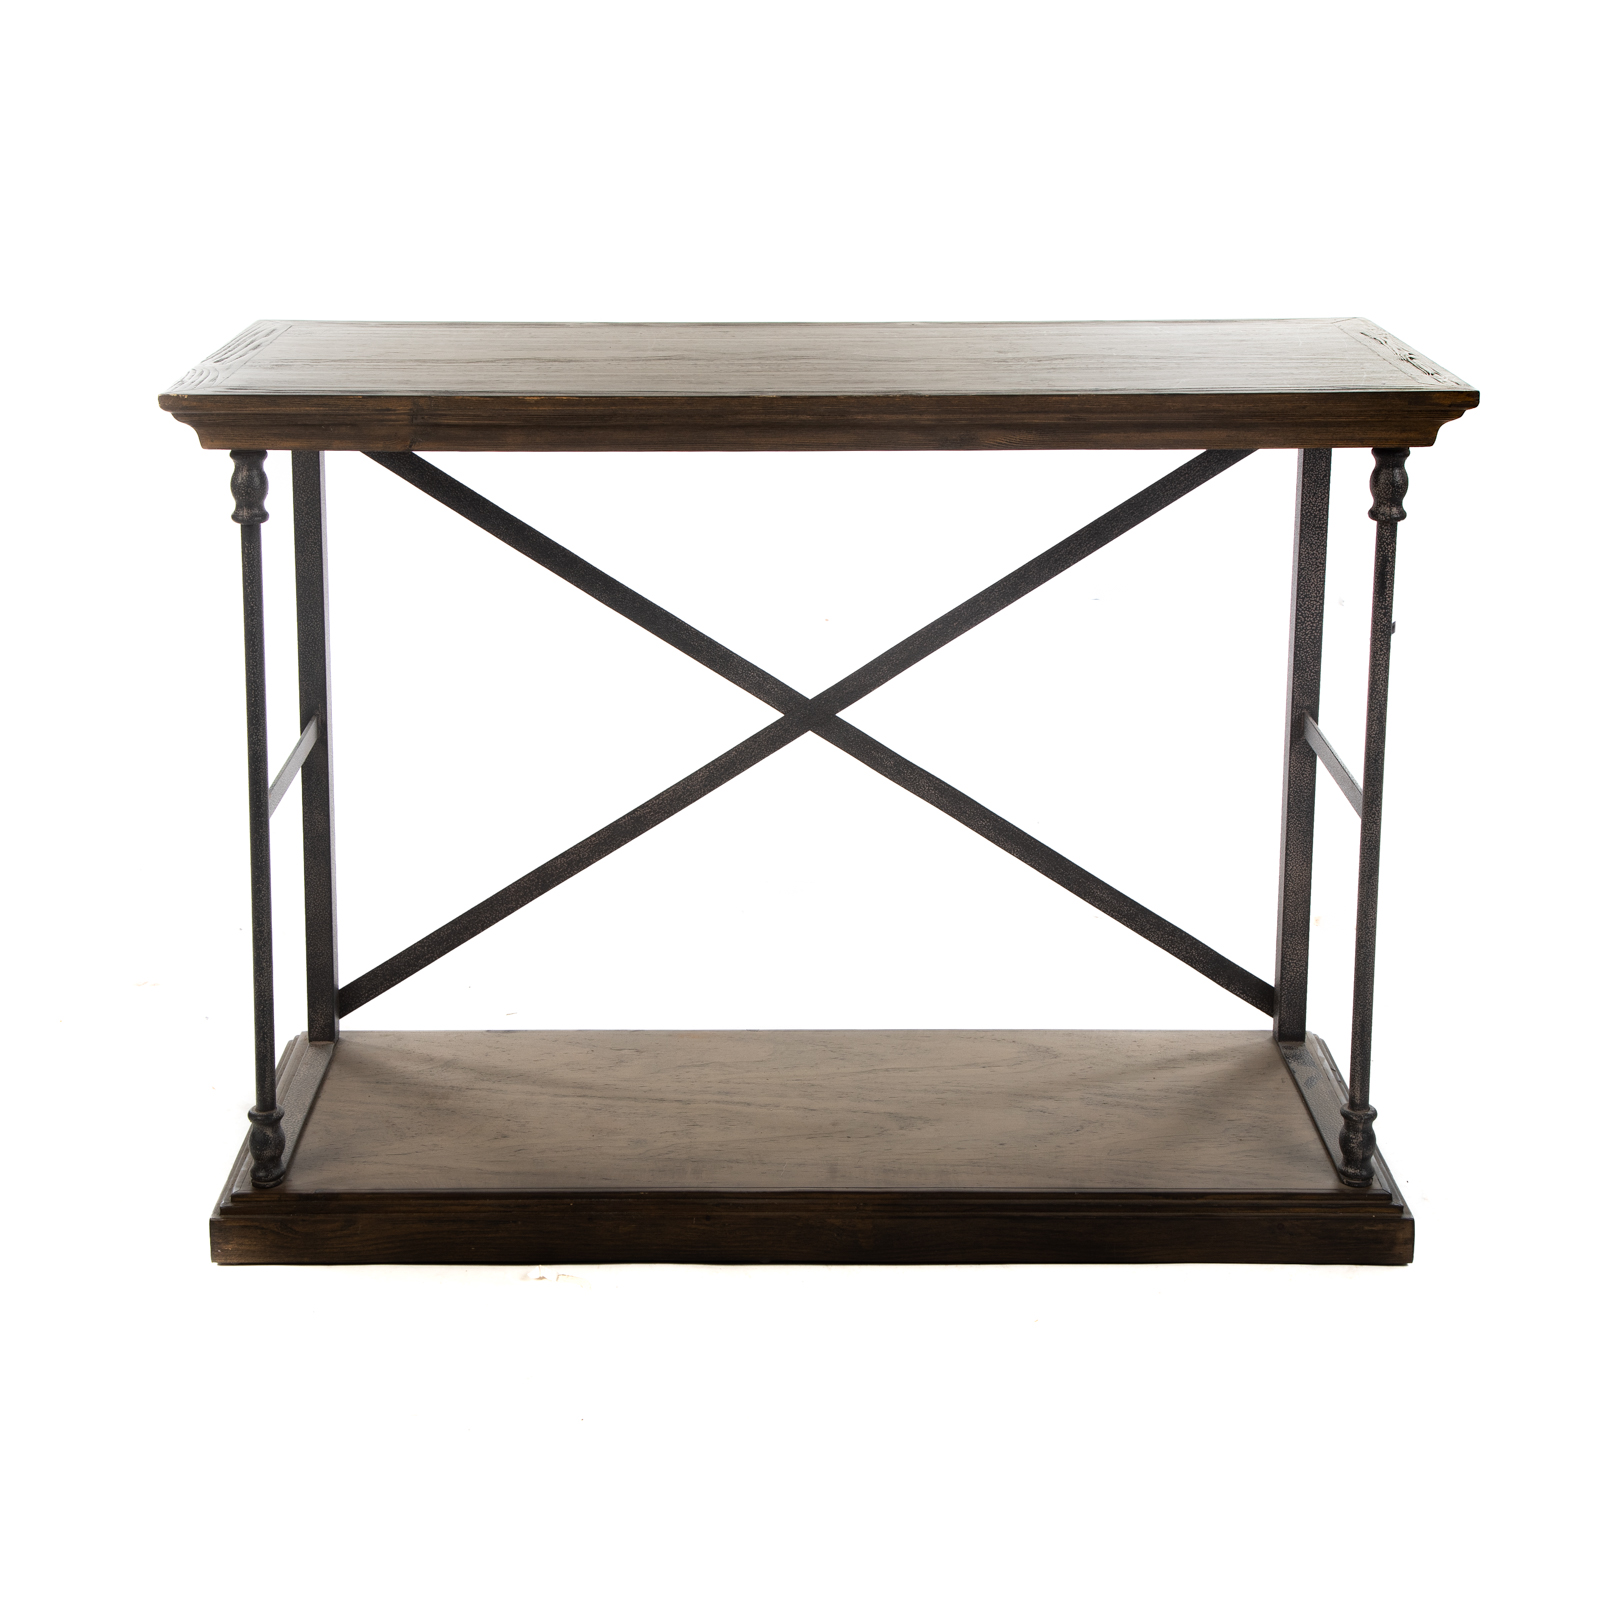 RUSTIC WOOD & METAL CONSOLE TABLE